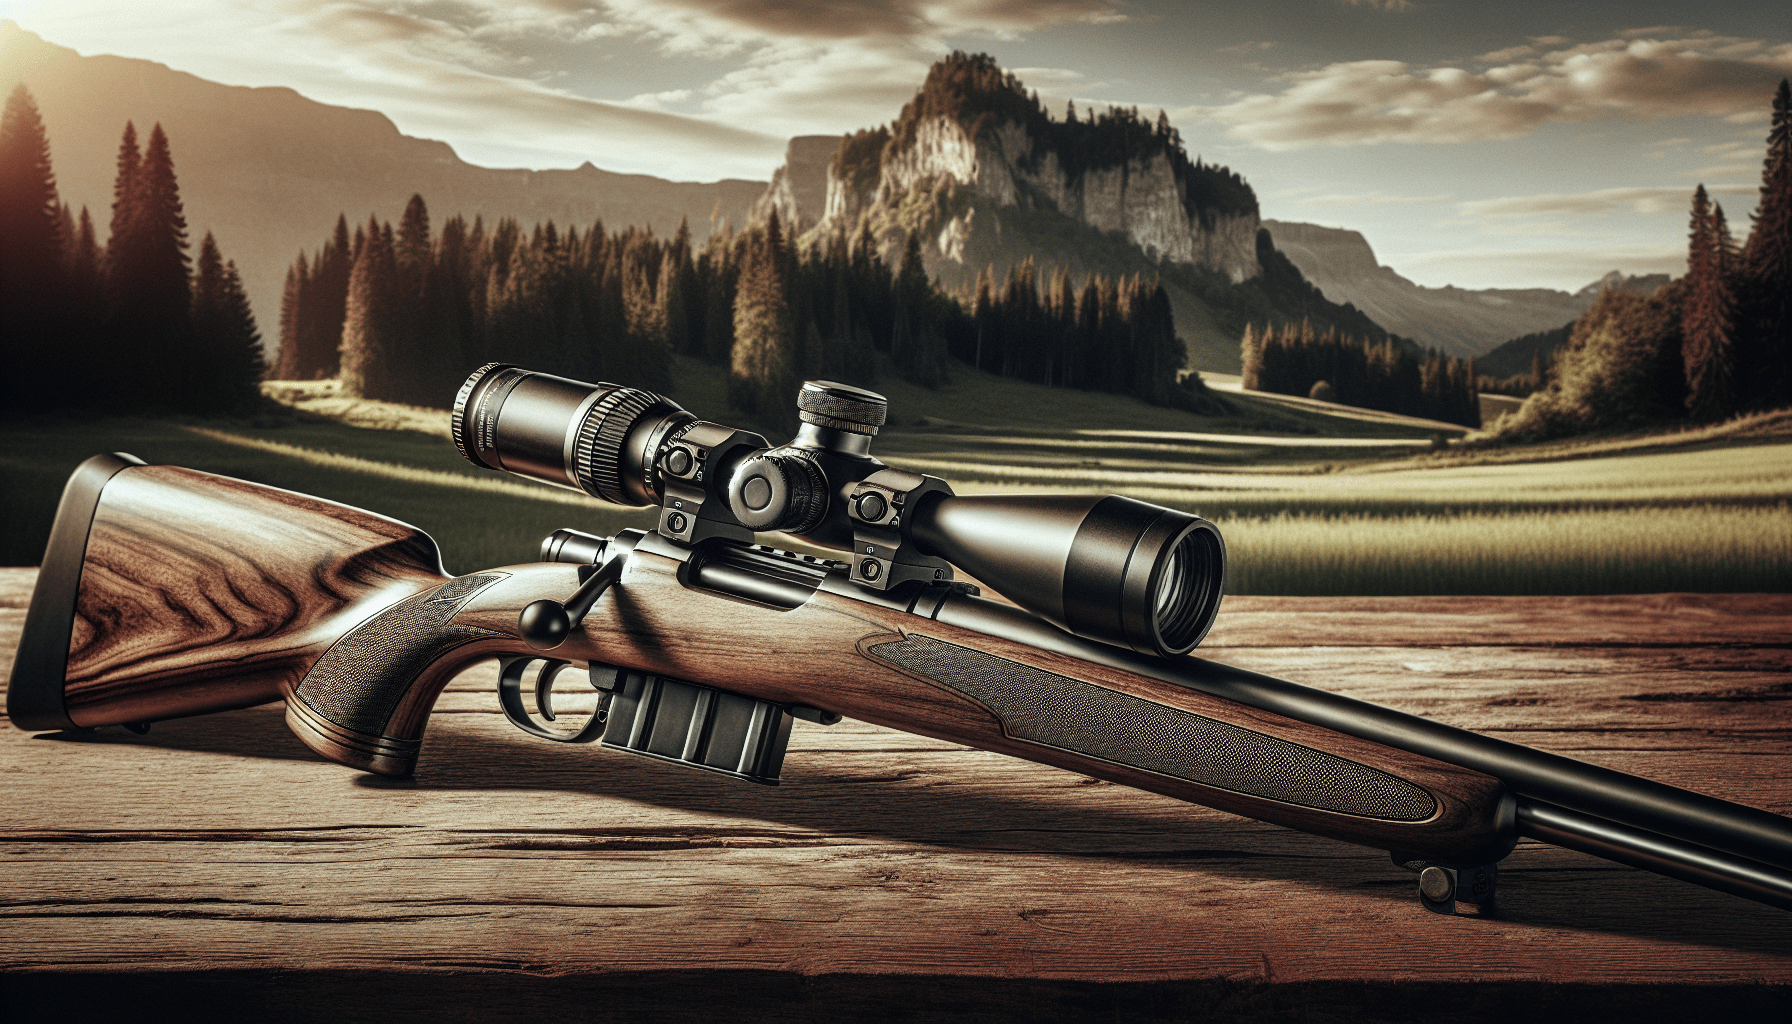 Can A Spotting Scope Be Mounted On A Rifle?